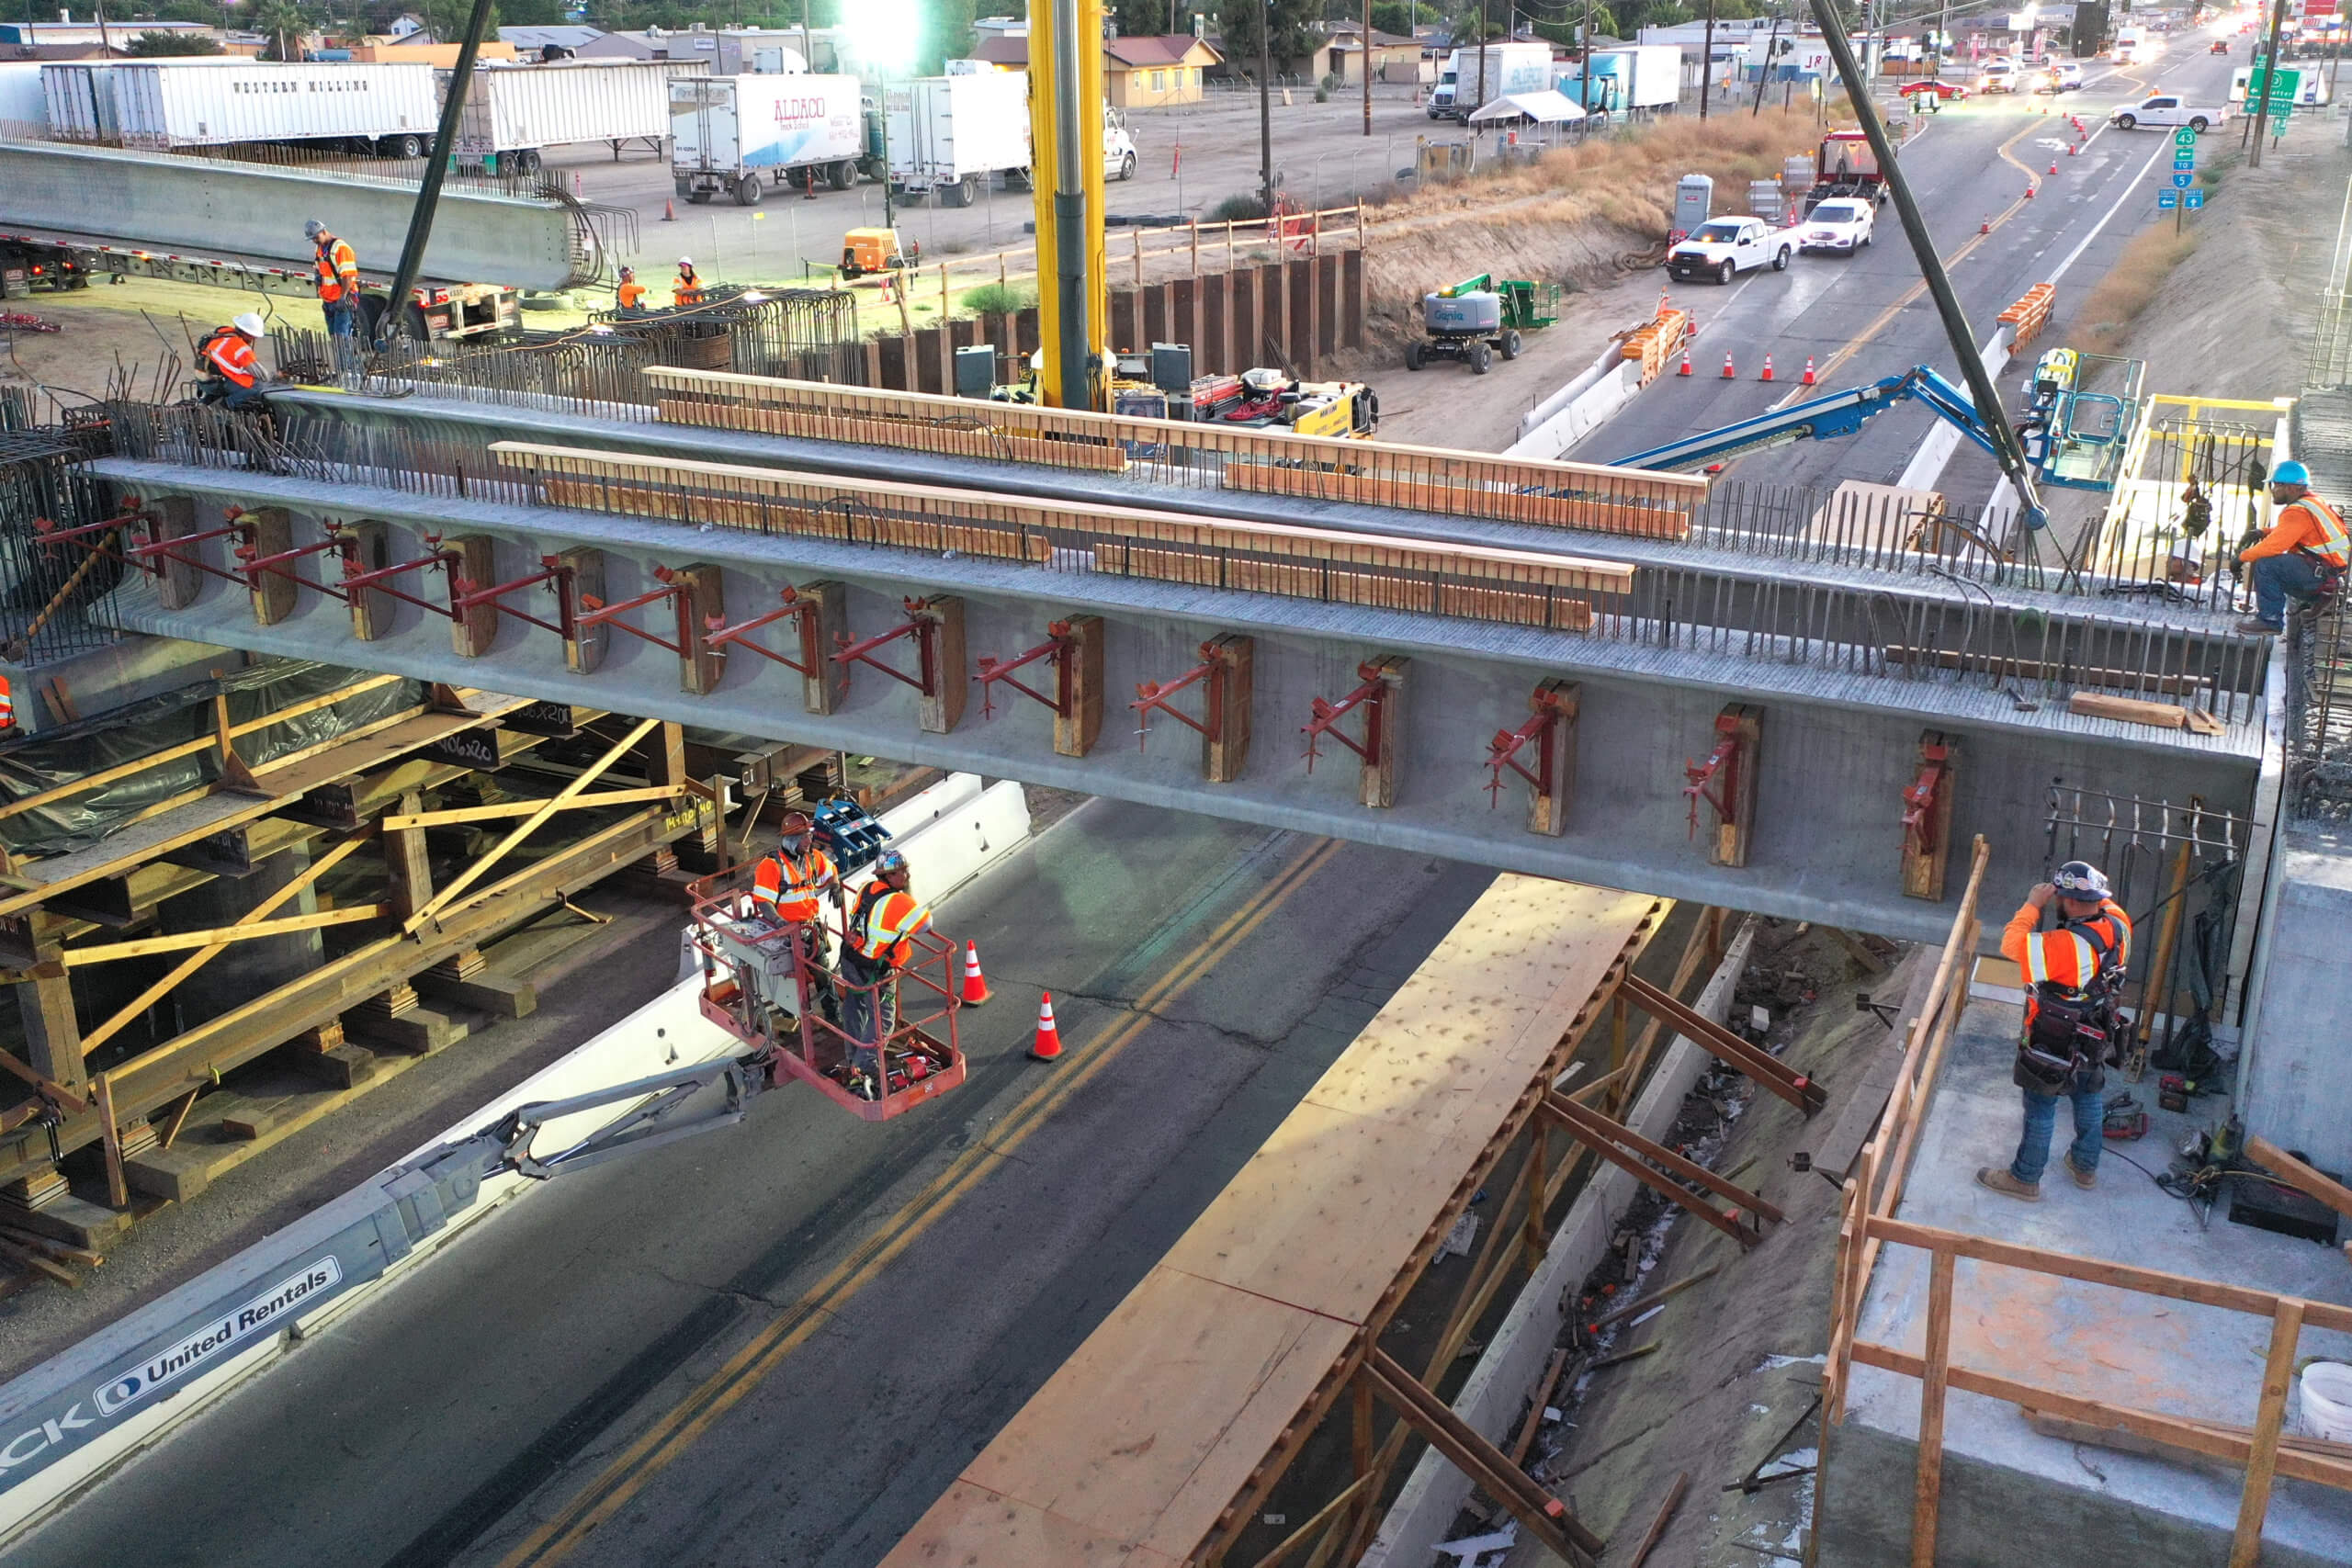 A shot from above, showing a concrete girder being placed on columns and abutments by a crane over state route 46 at dusk. Other heavy machinery and workers and vehicles also visible.